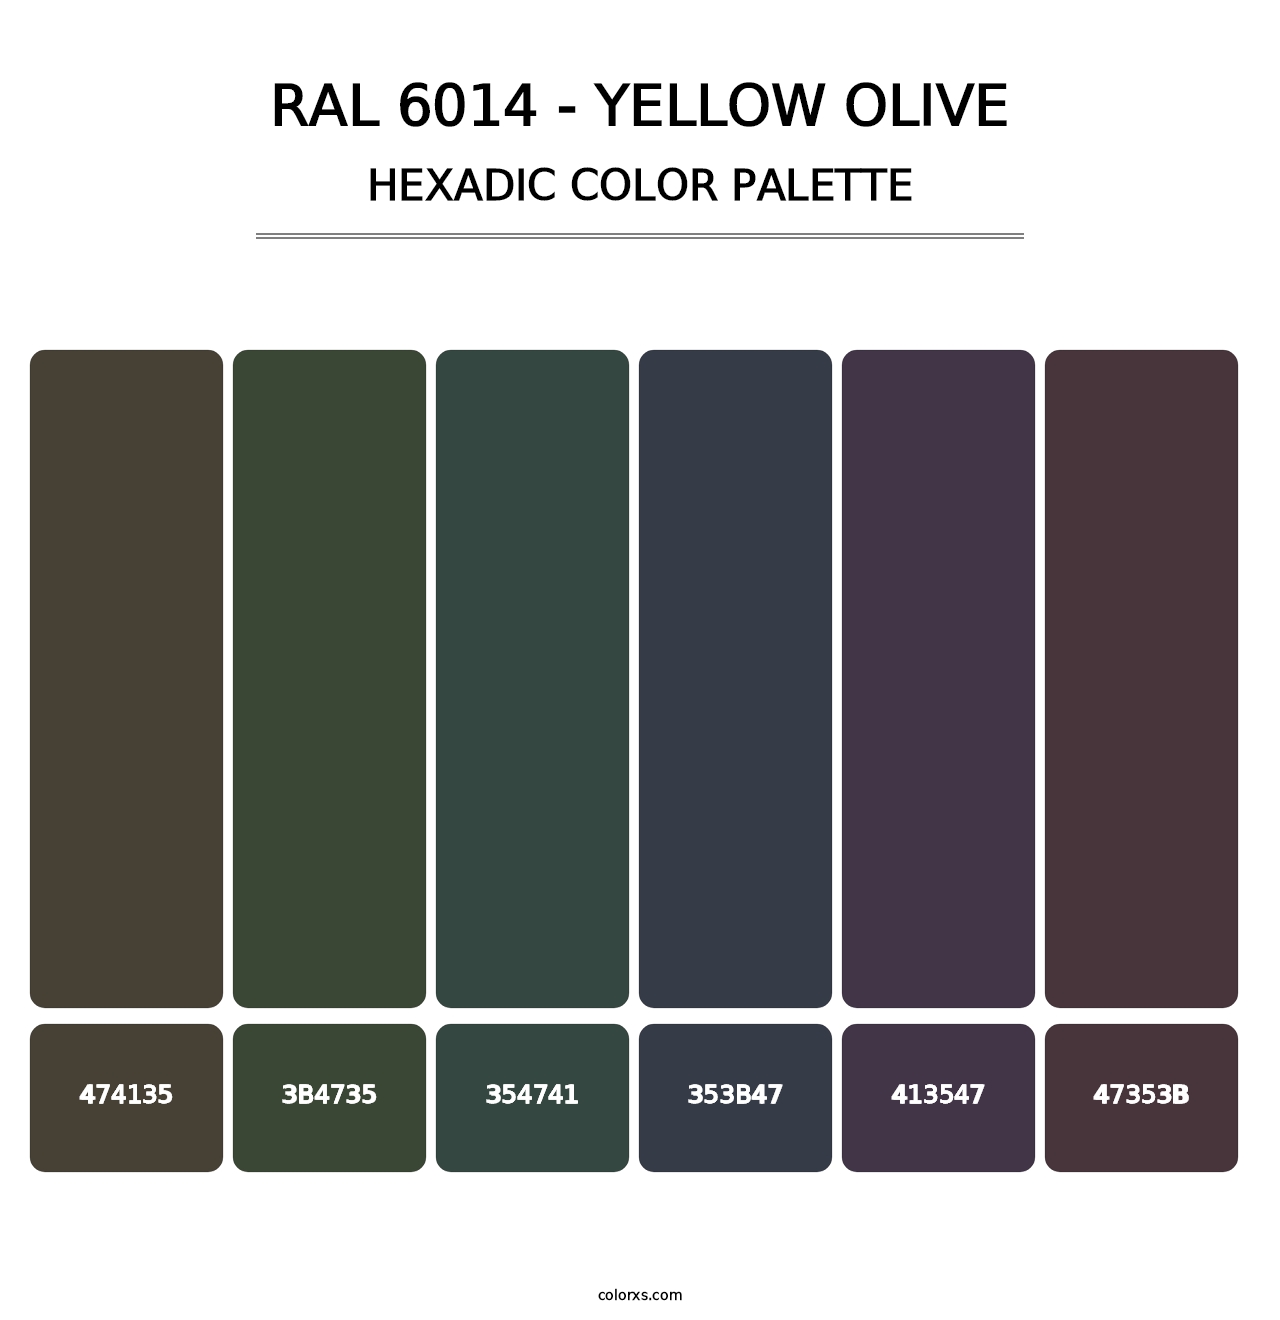 RAL 6014 - Yellow Olive - Hexadic Color Palette